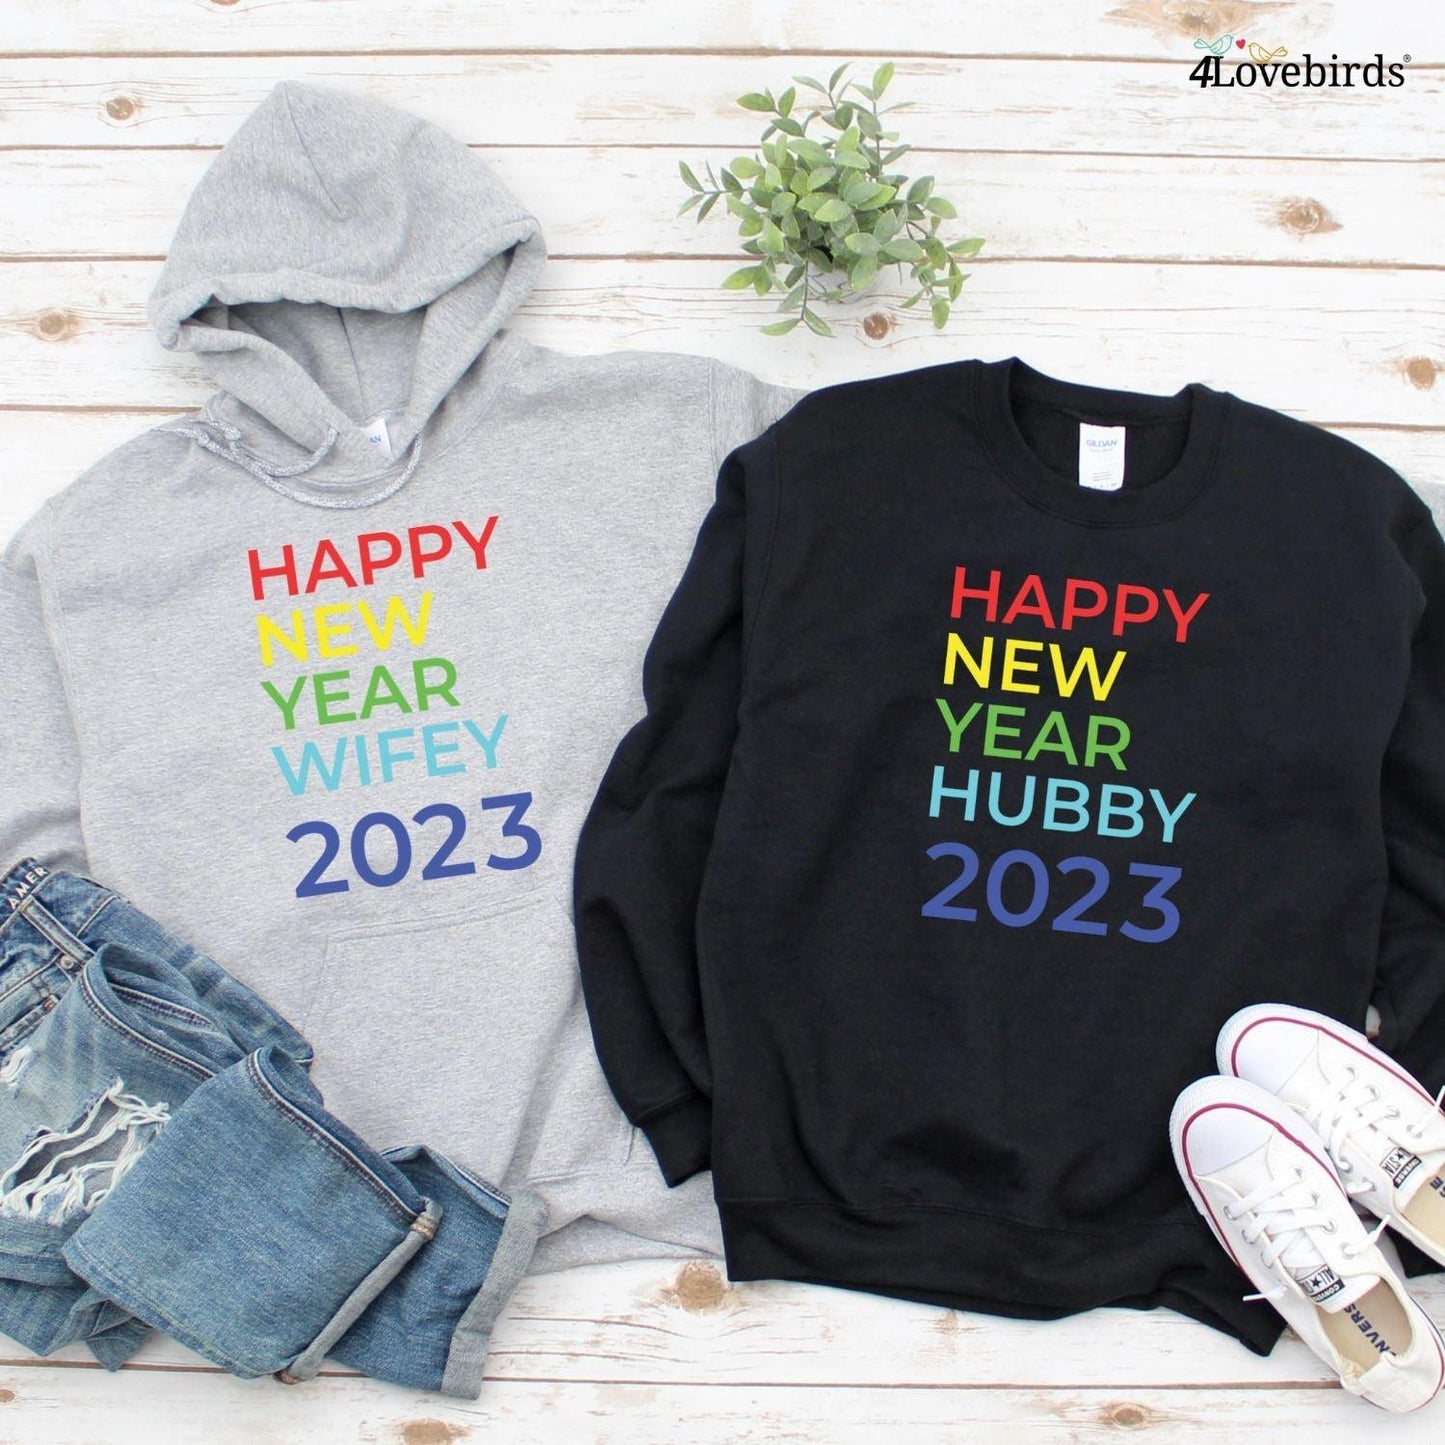 Happy New Year Custom Matching Set: Perfect Outfits for Couples & Lovers Alike! - 4Lovebirds